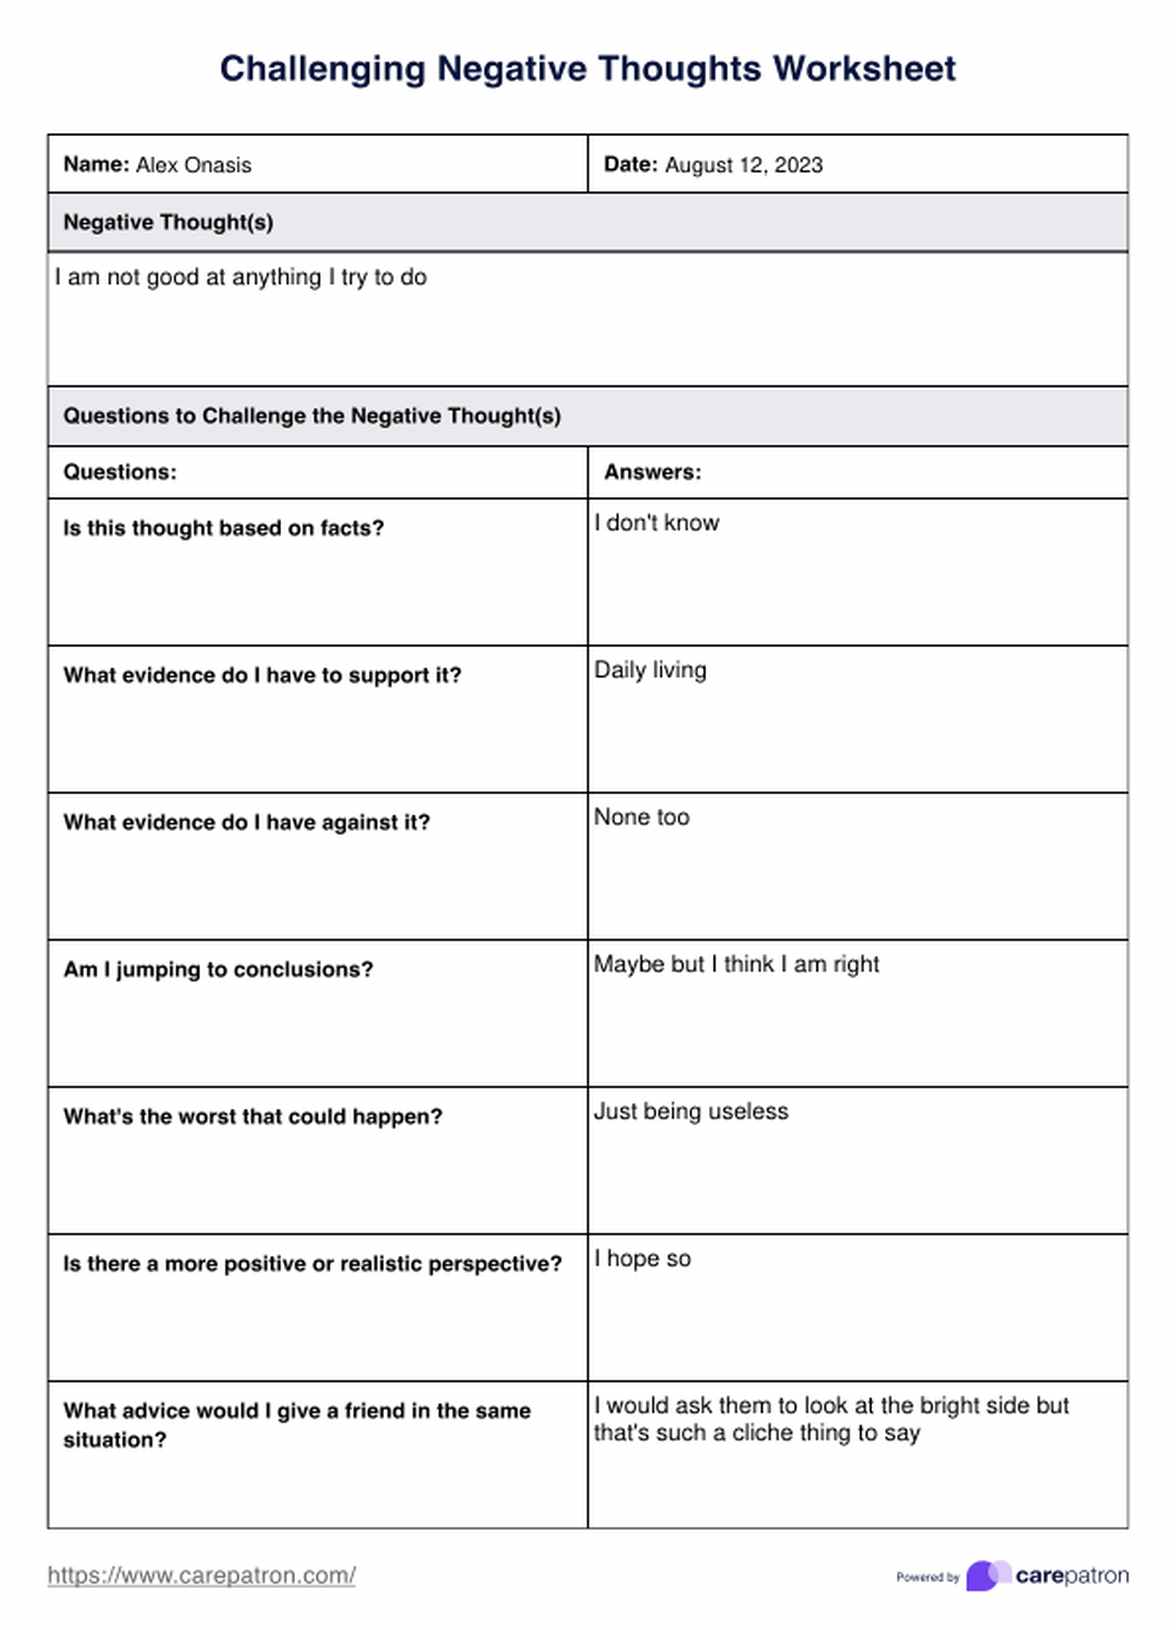 Challenging Negative Thoughts Worksheet PDF Example